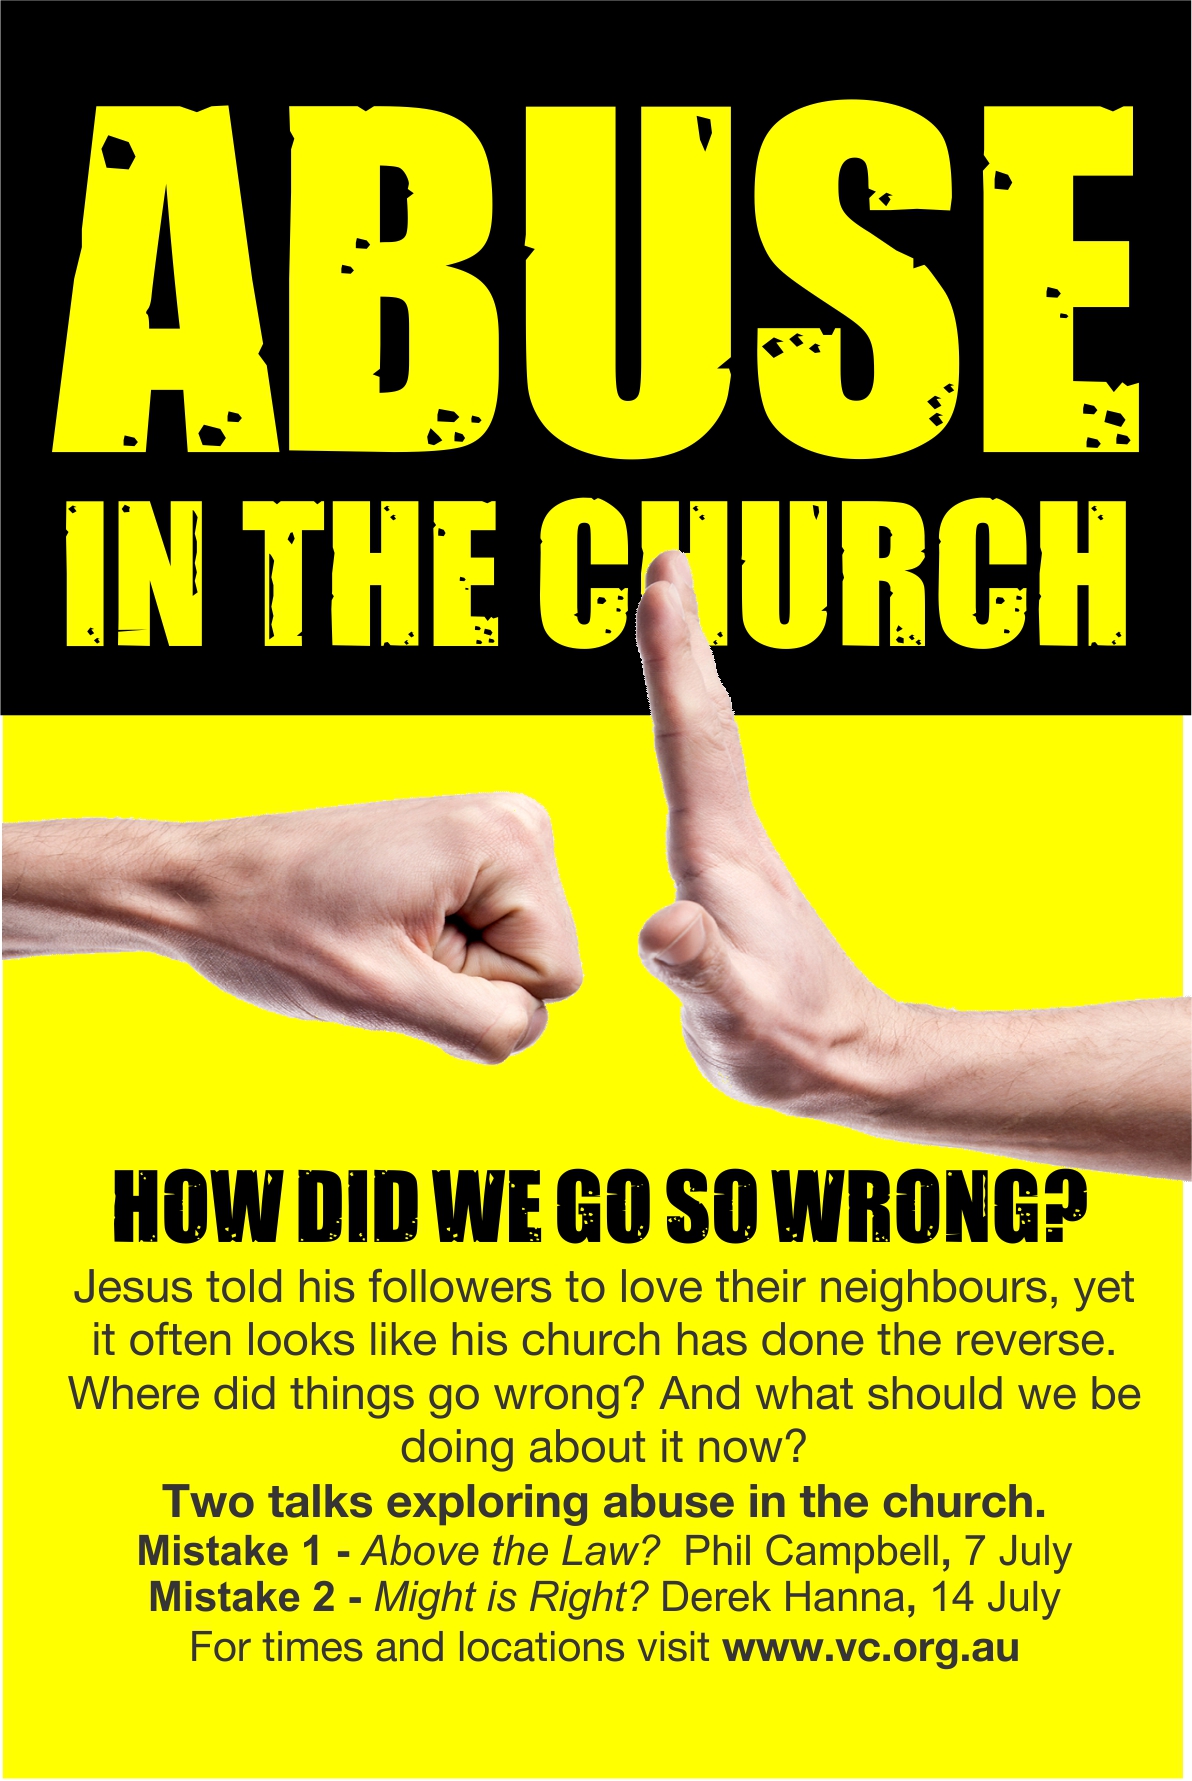 Might is Right (Abuse in the Church)